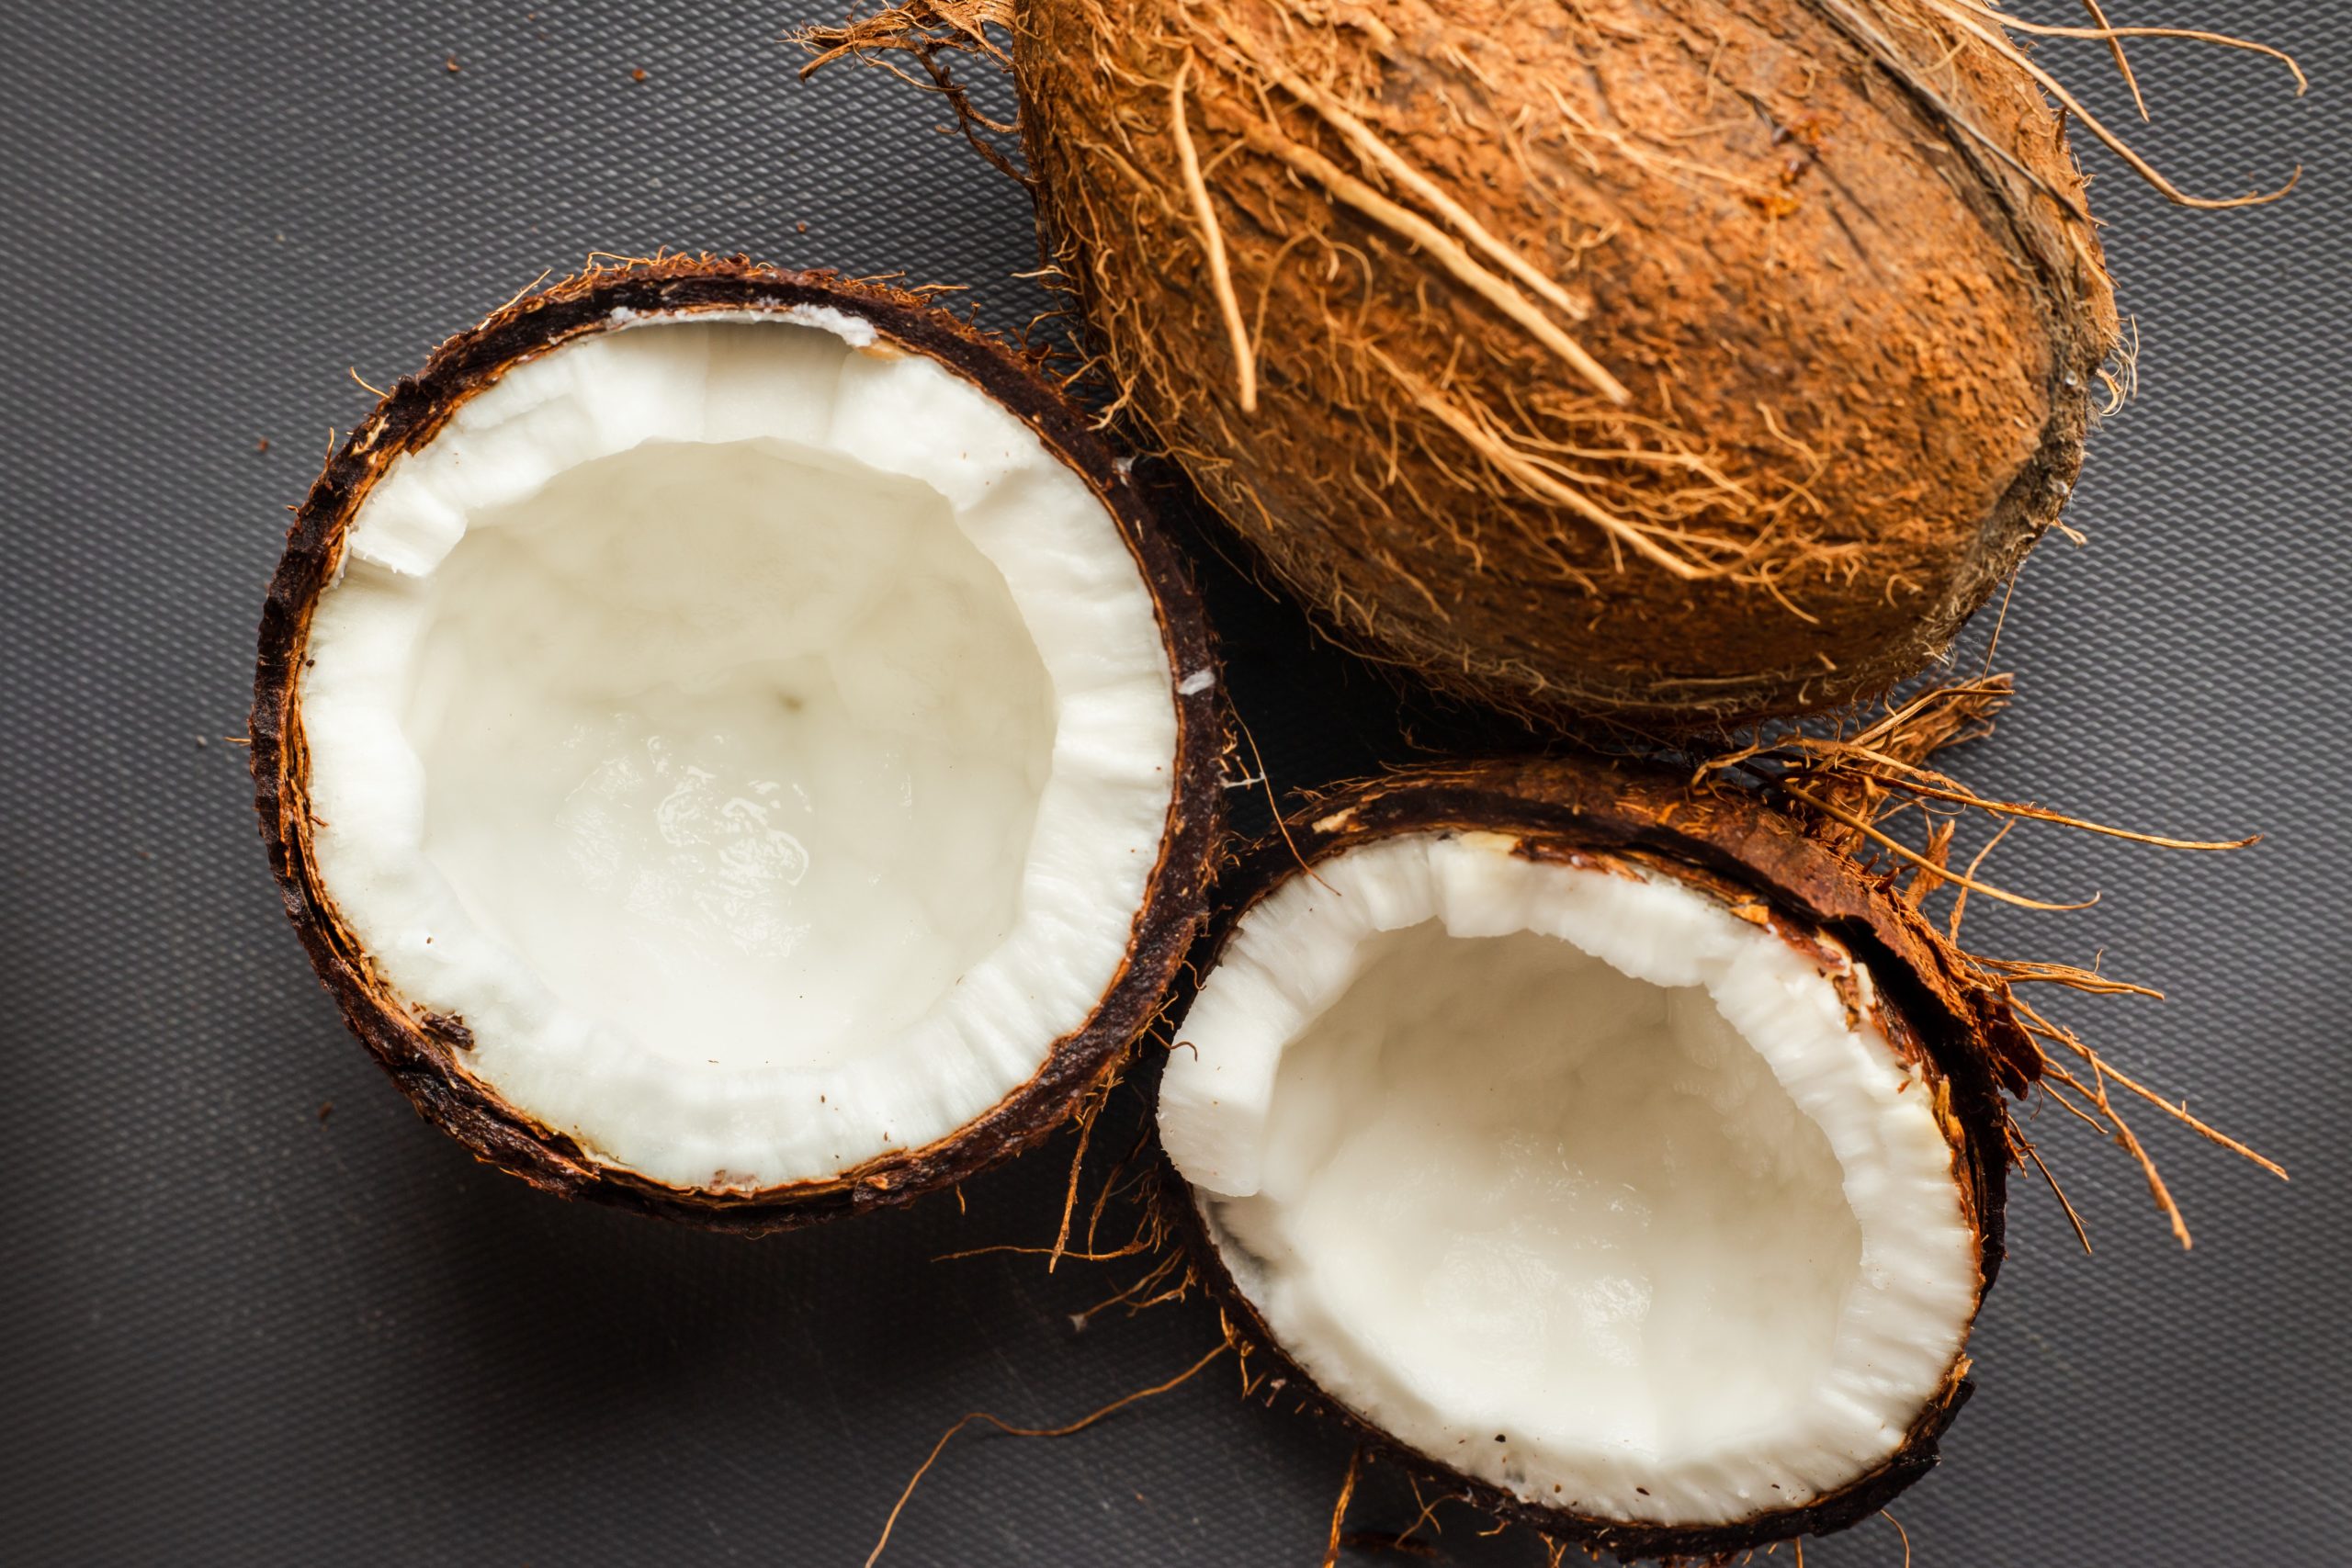 Coconut oil is that the miracle you think it is.